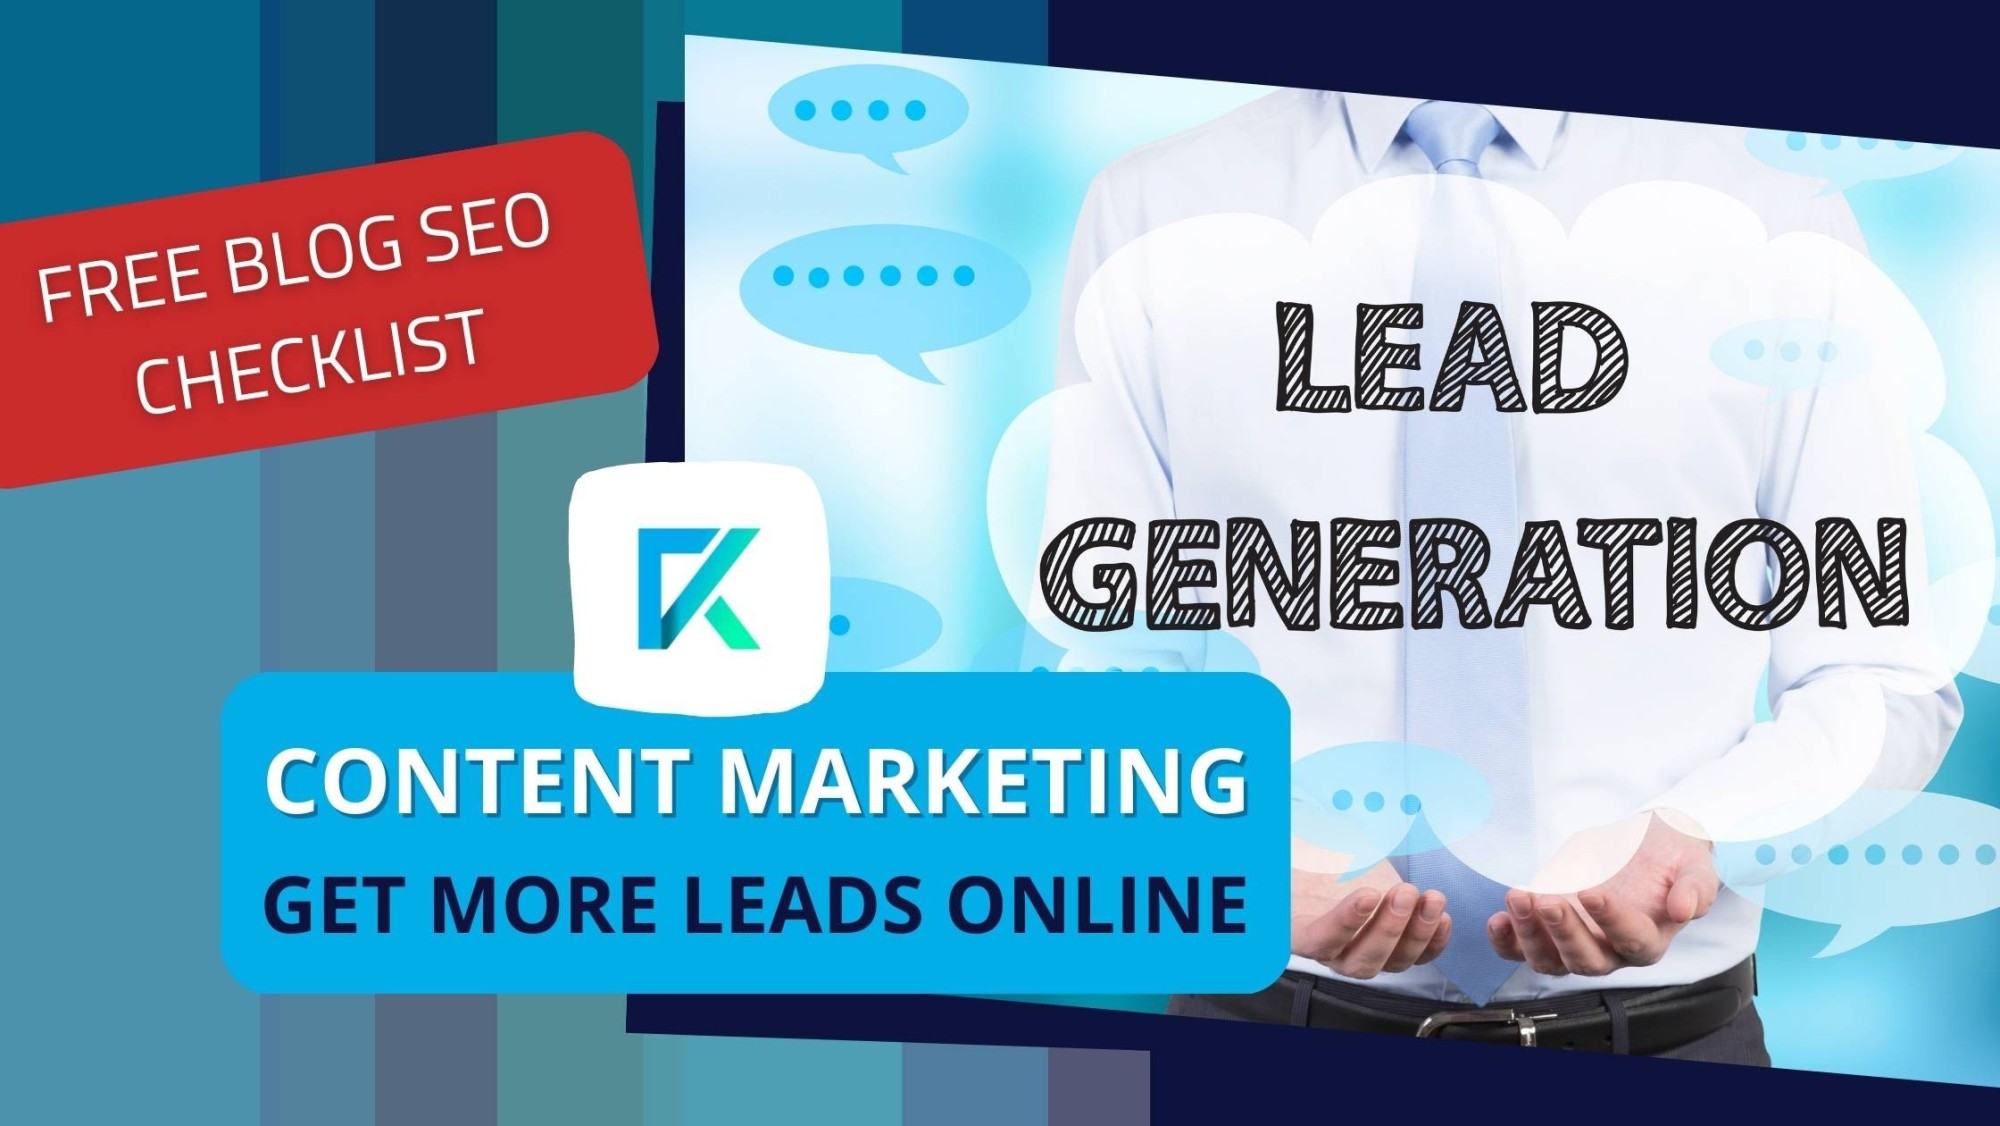 Content Marketing - Get More Leads Online